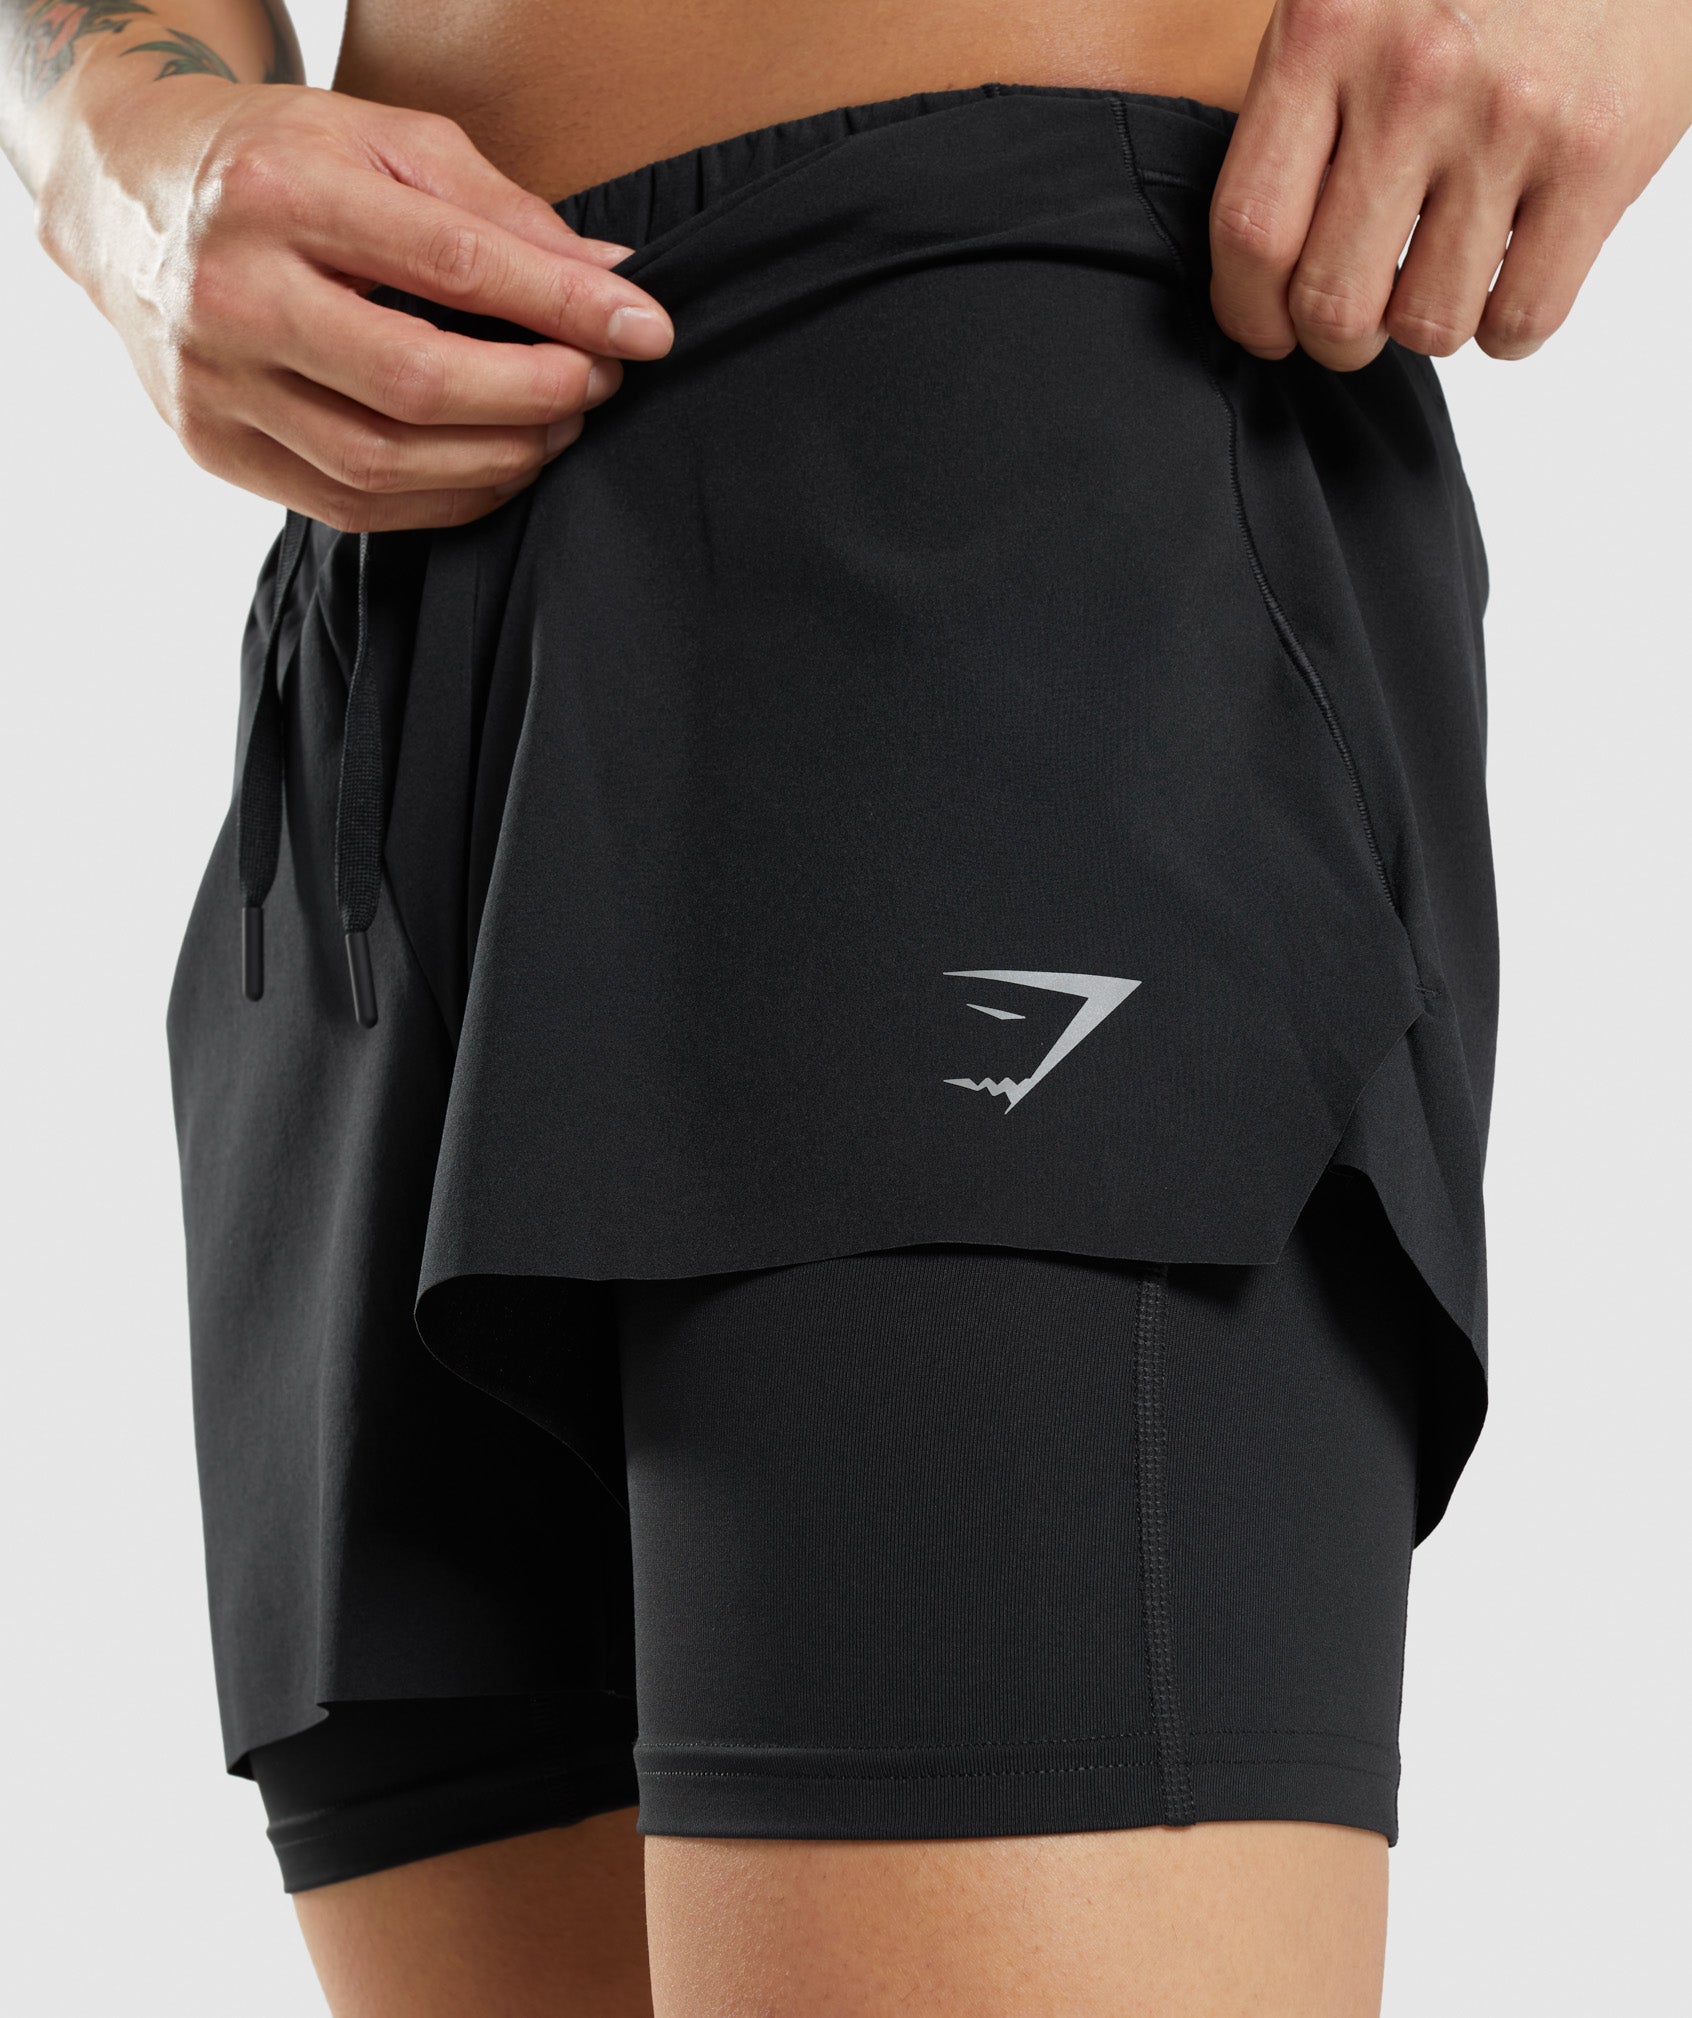 Speed 5" 2 In 1 Shorts in Black - view 6